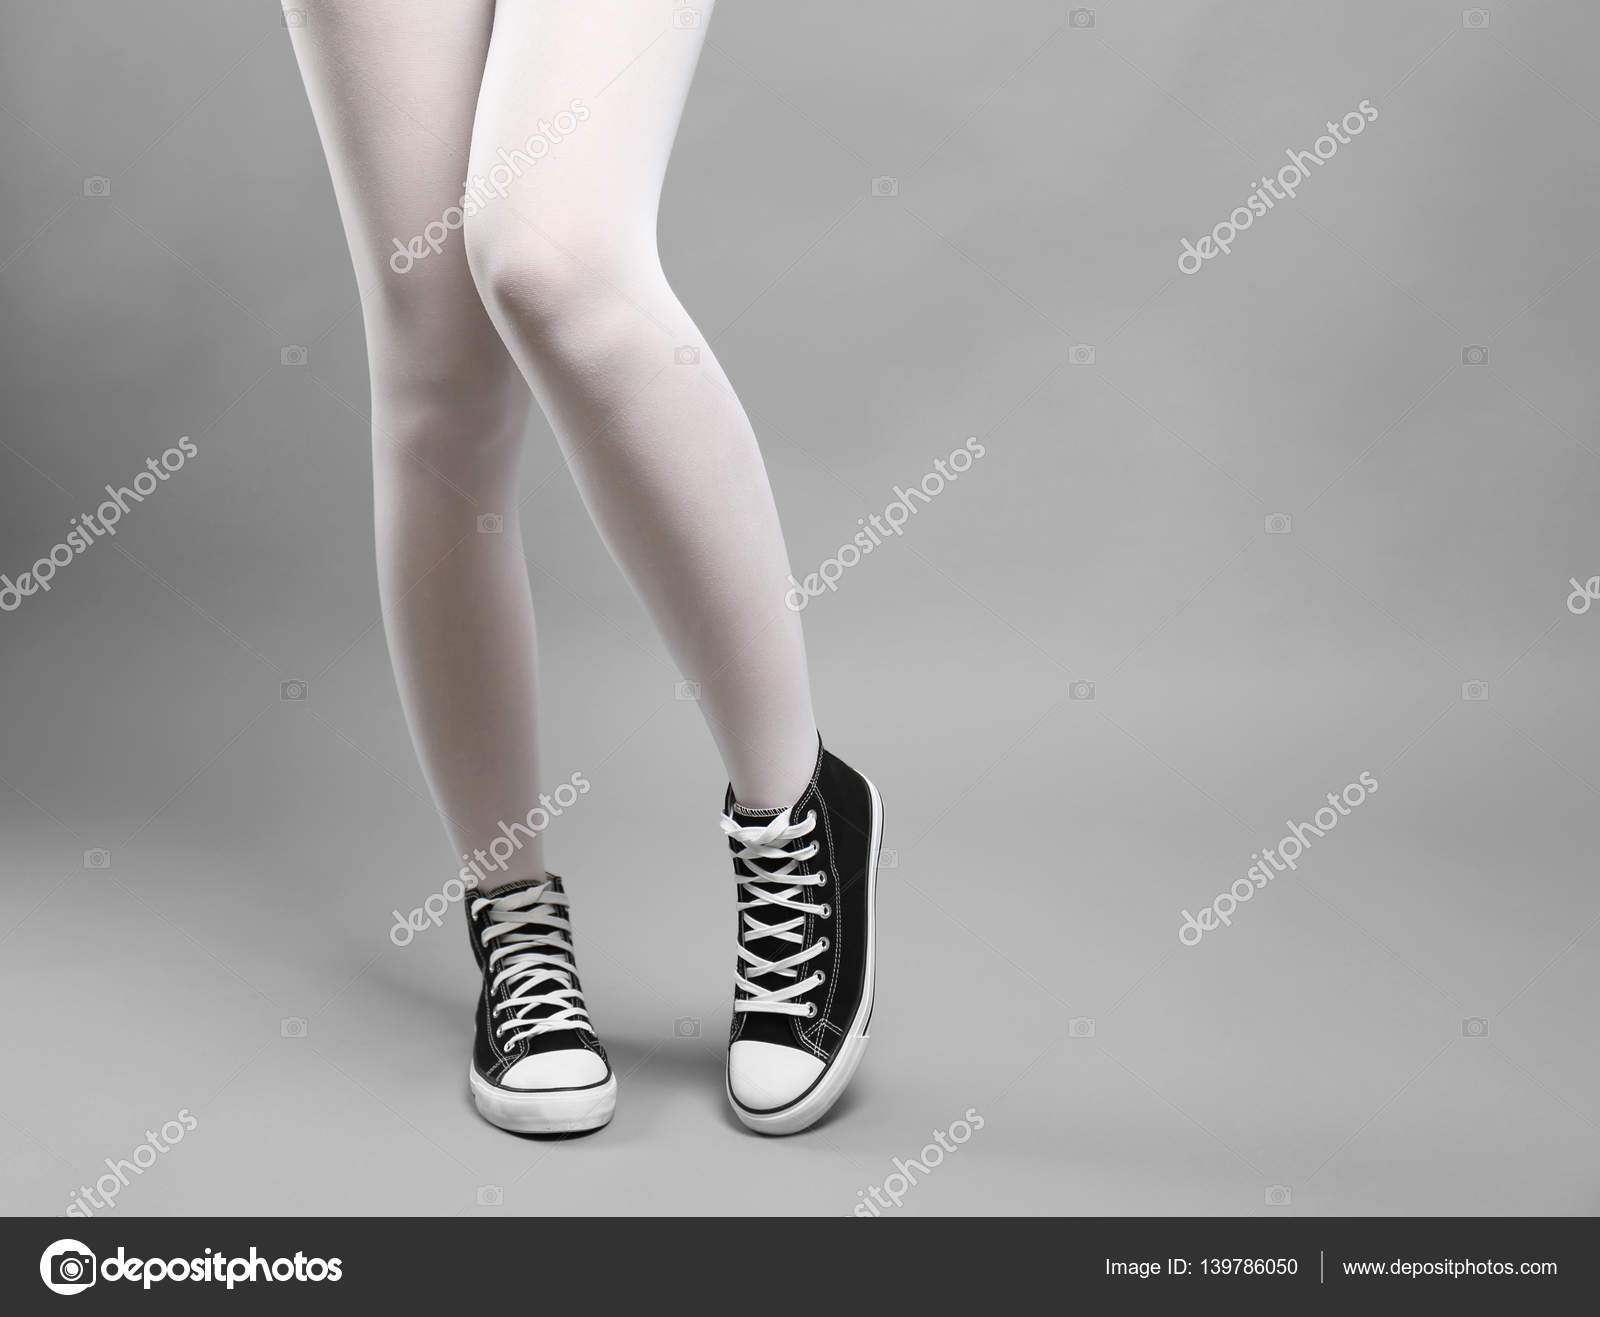 Ballerina Tights Stock Photos and Images - 123RF